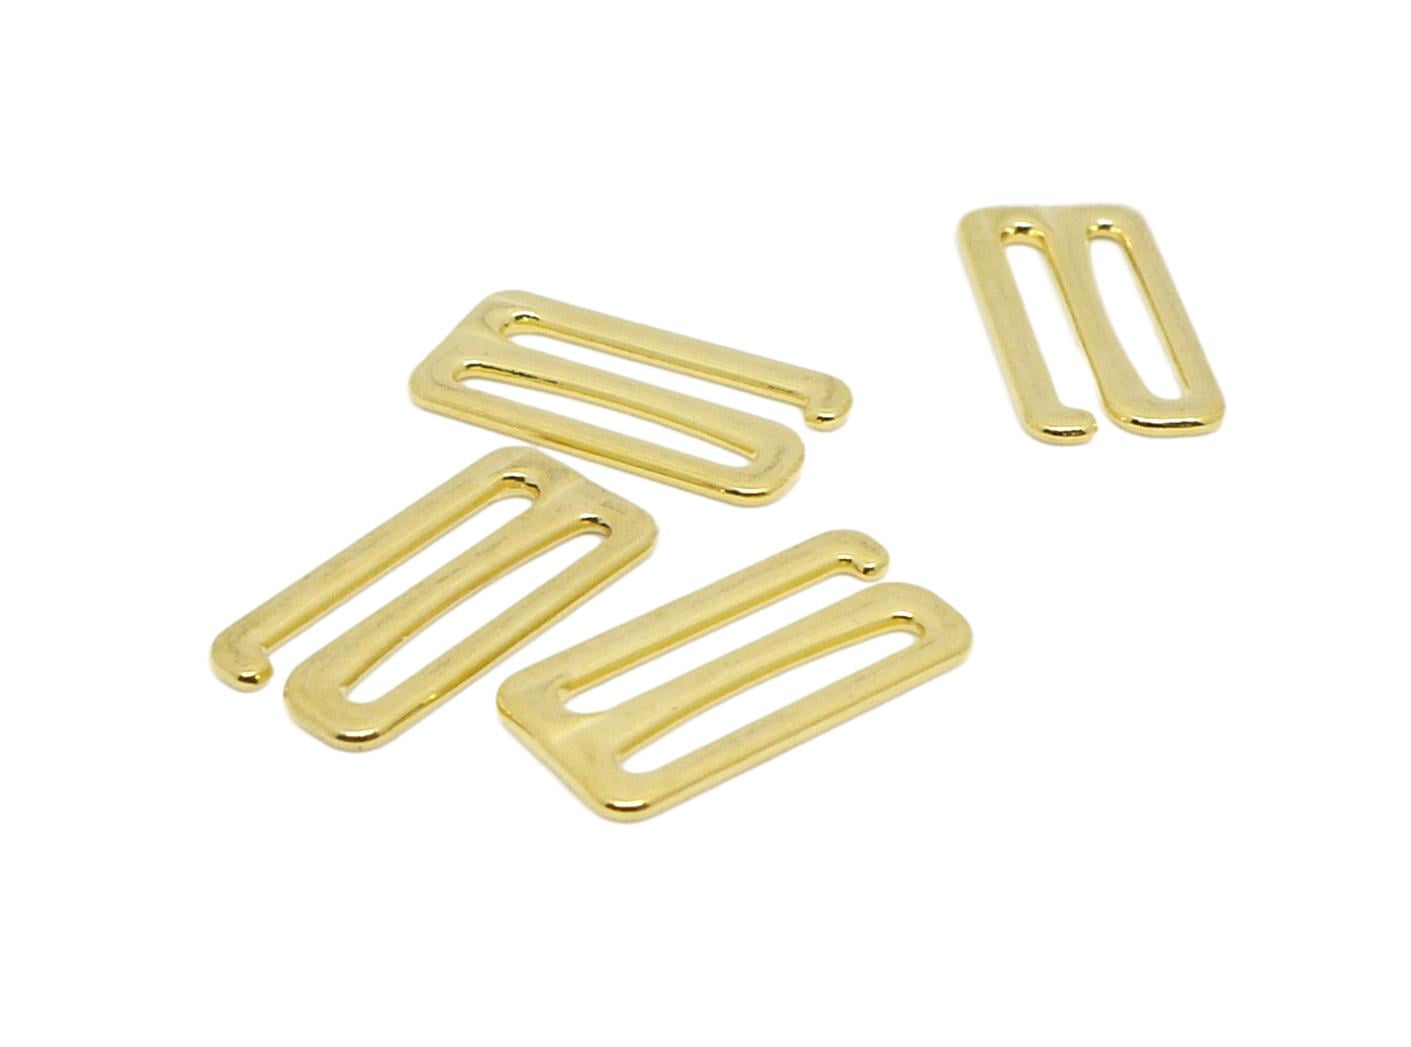 Porcelynne Gold Metal Alloy Replacement Bra Strap Slide Hook 4 Pieces 2 Pairs 1 25mm Opening